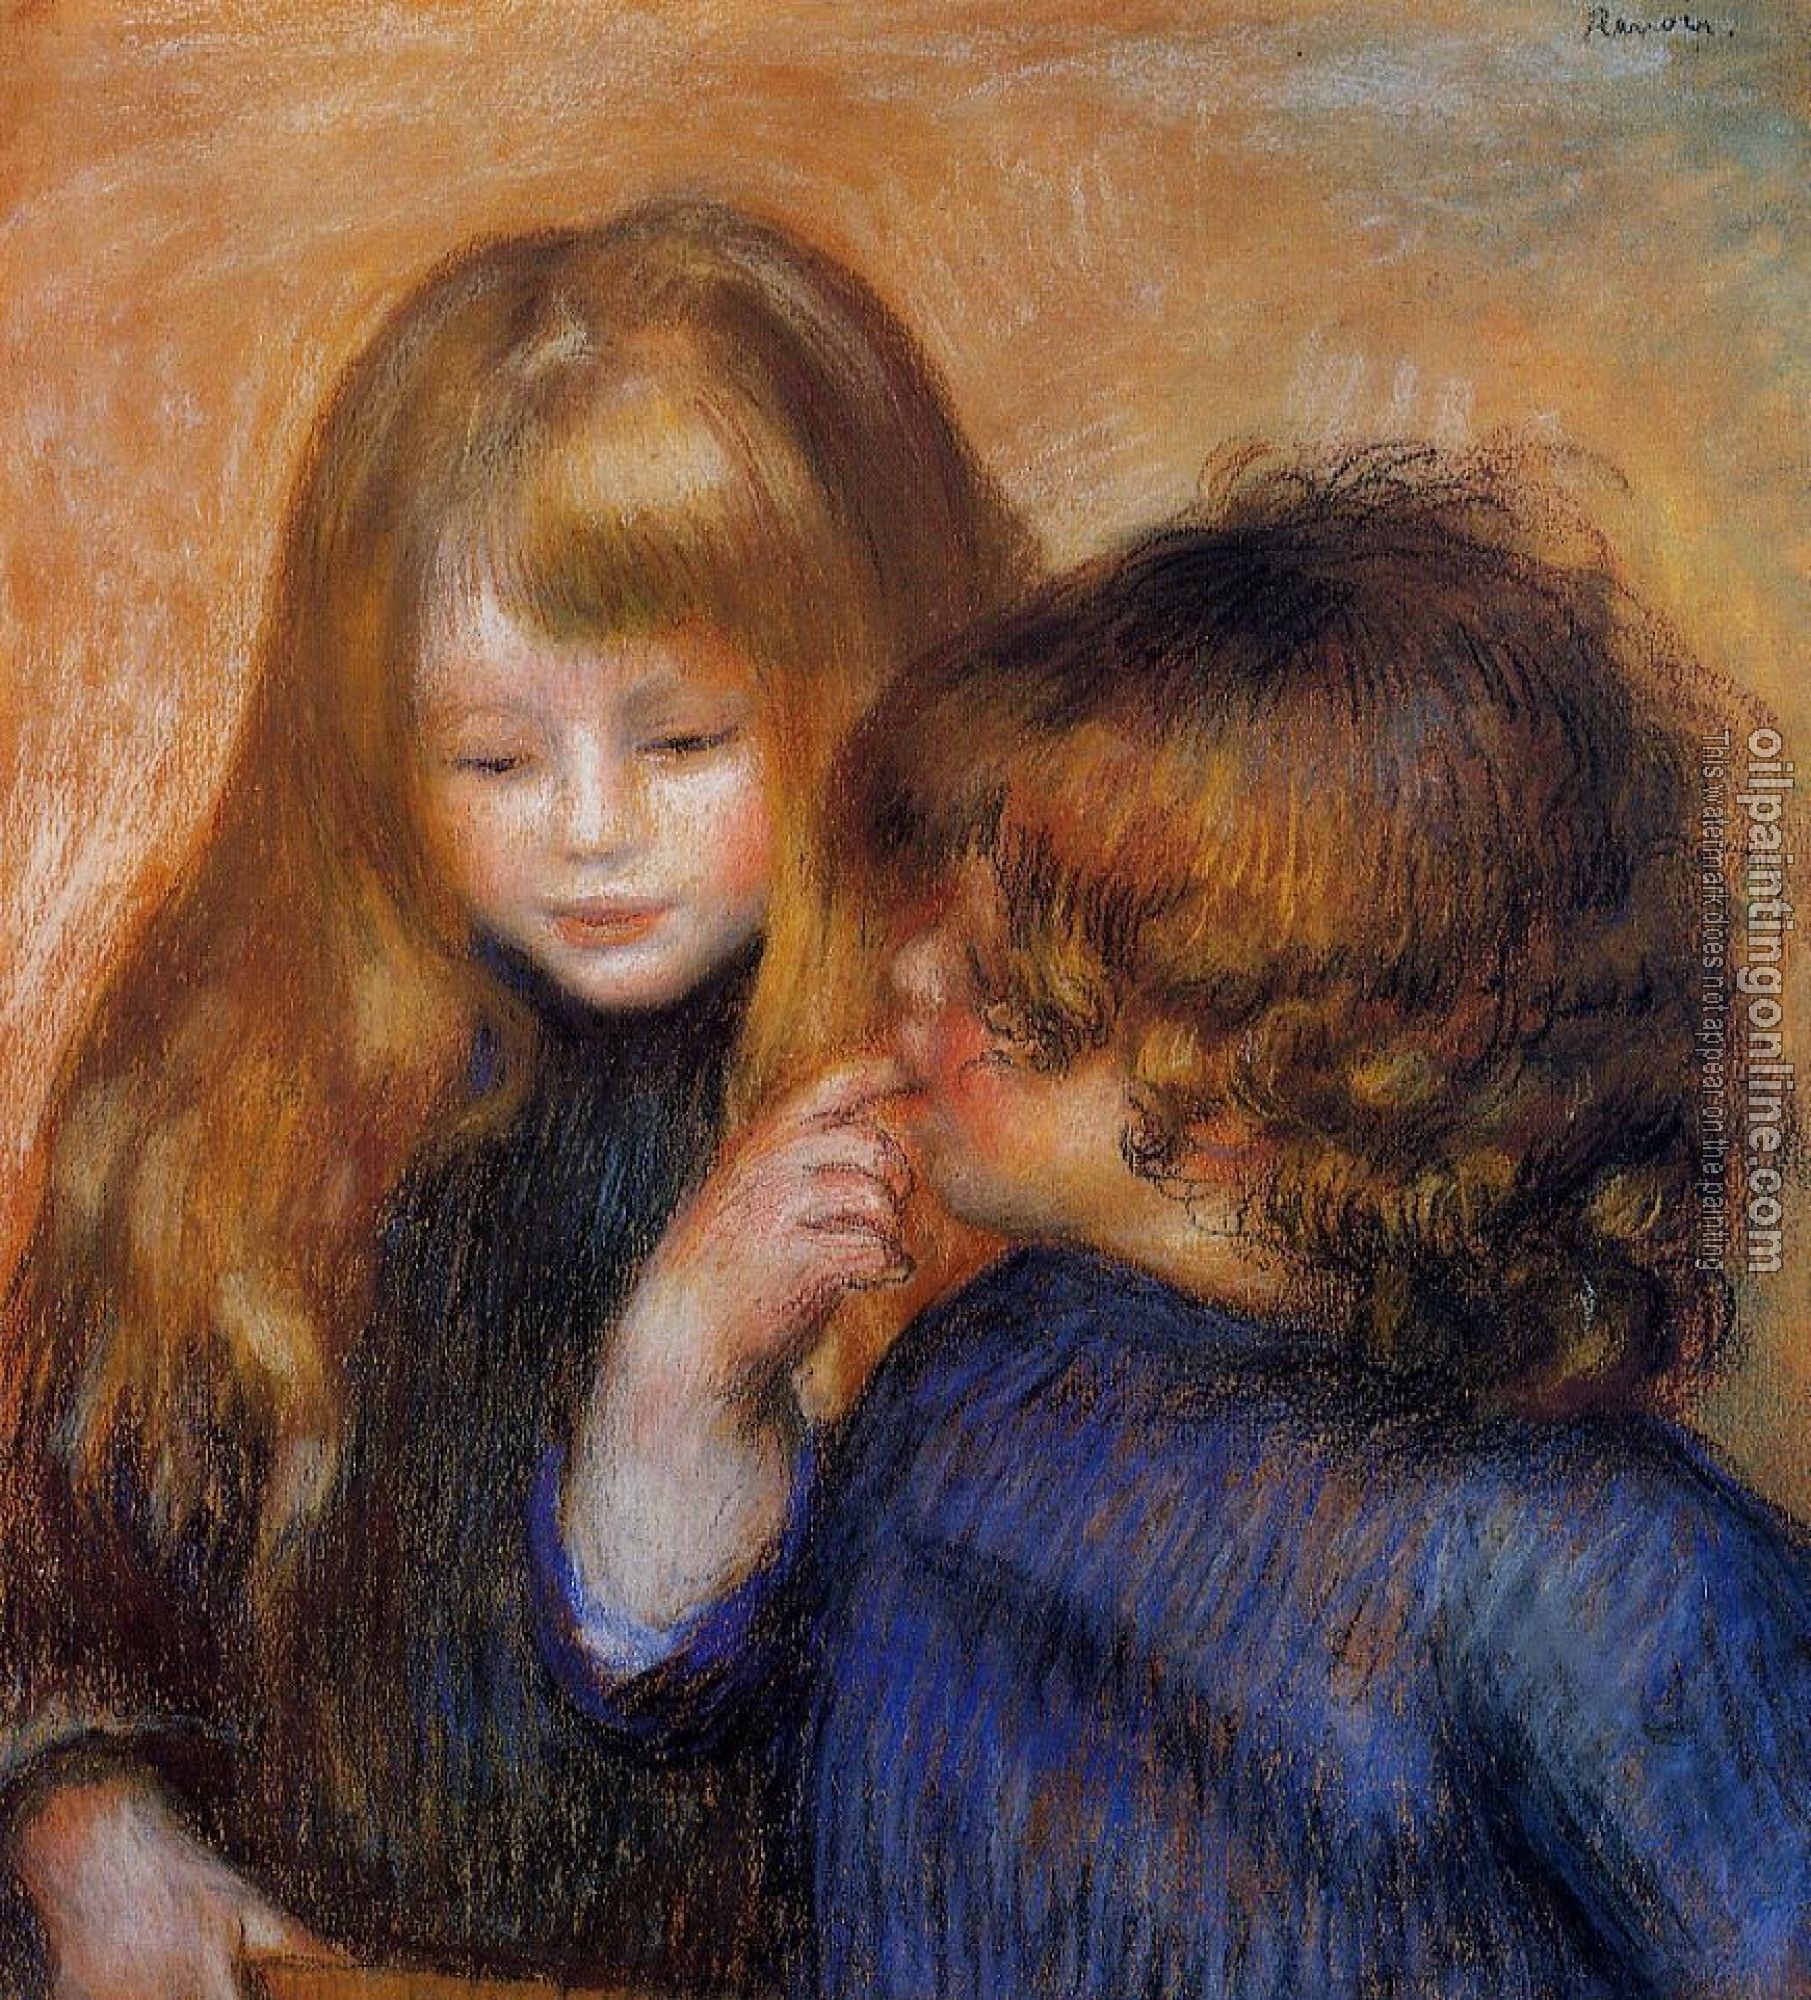 Renoir, Pierre Auguste - Jean and Coco, The Artist's Sons